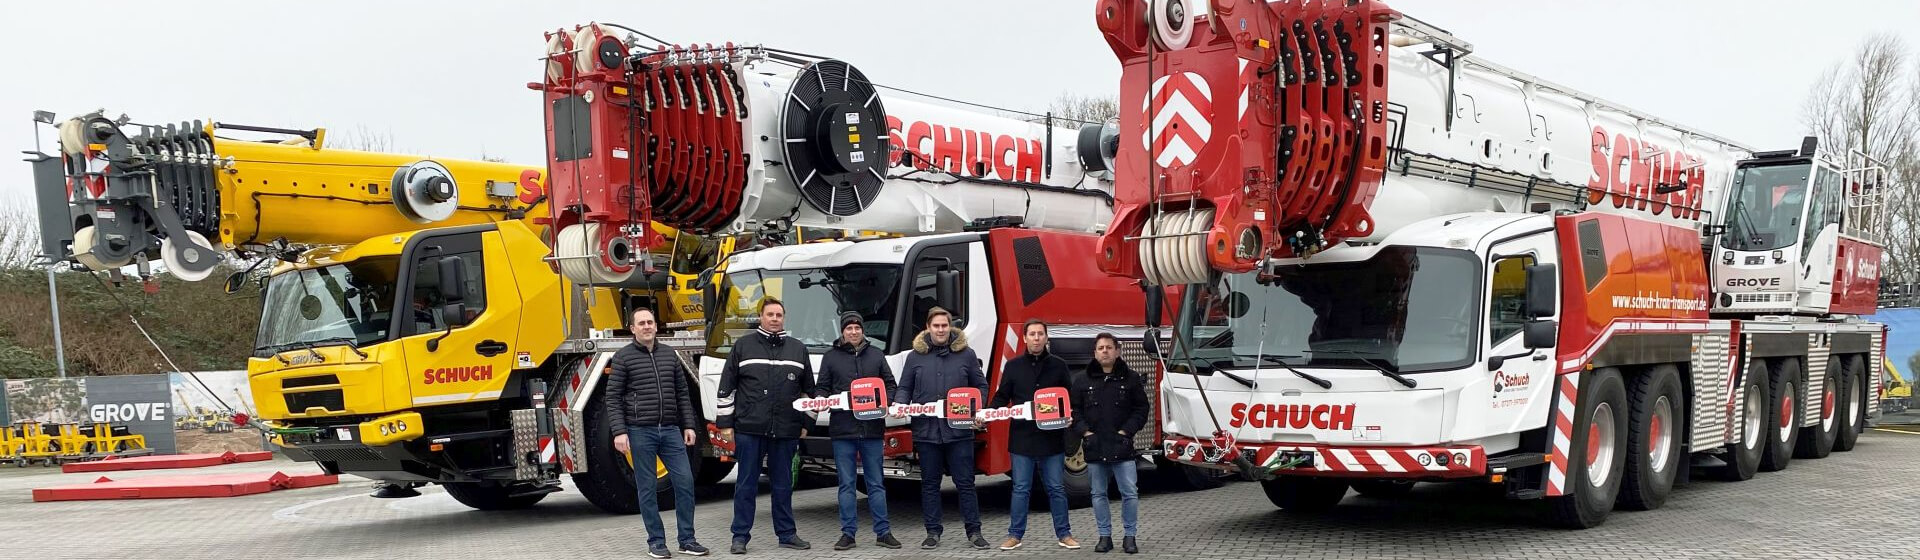 Schuch-Heavylift-Corporation-acquires-eight-new-Grove-mobile-cranes-1.jpg